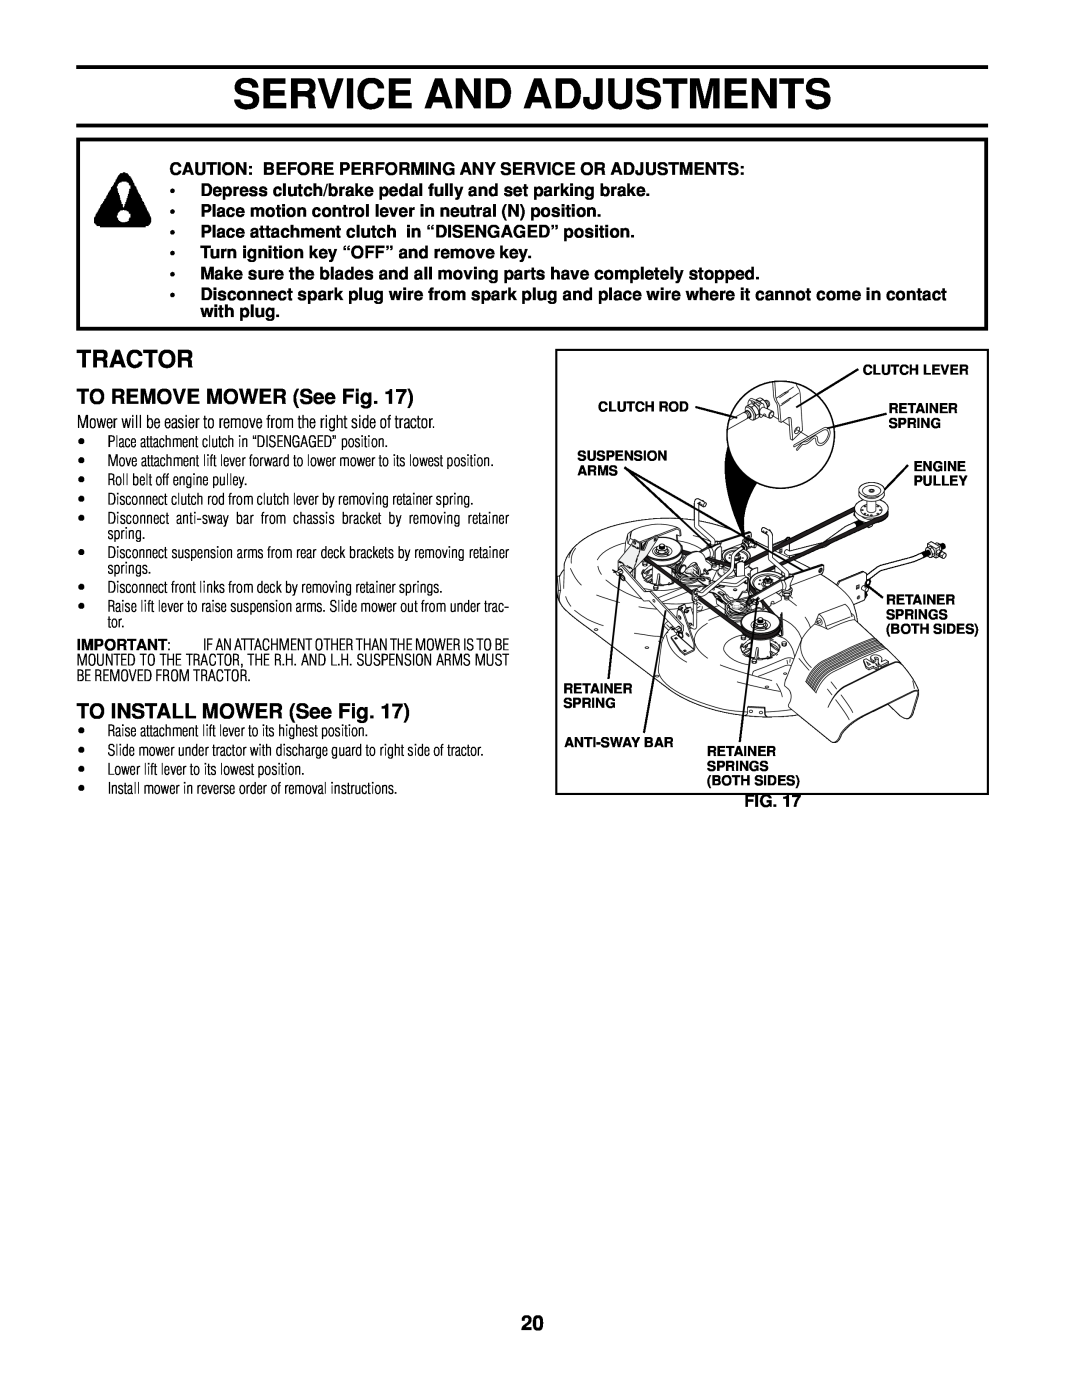 Poulan 161608 owner manual Service And Adjustments, Tractor, TO REMOVE MOWER See Fig, TO INSTALL MOWER See Fig 